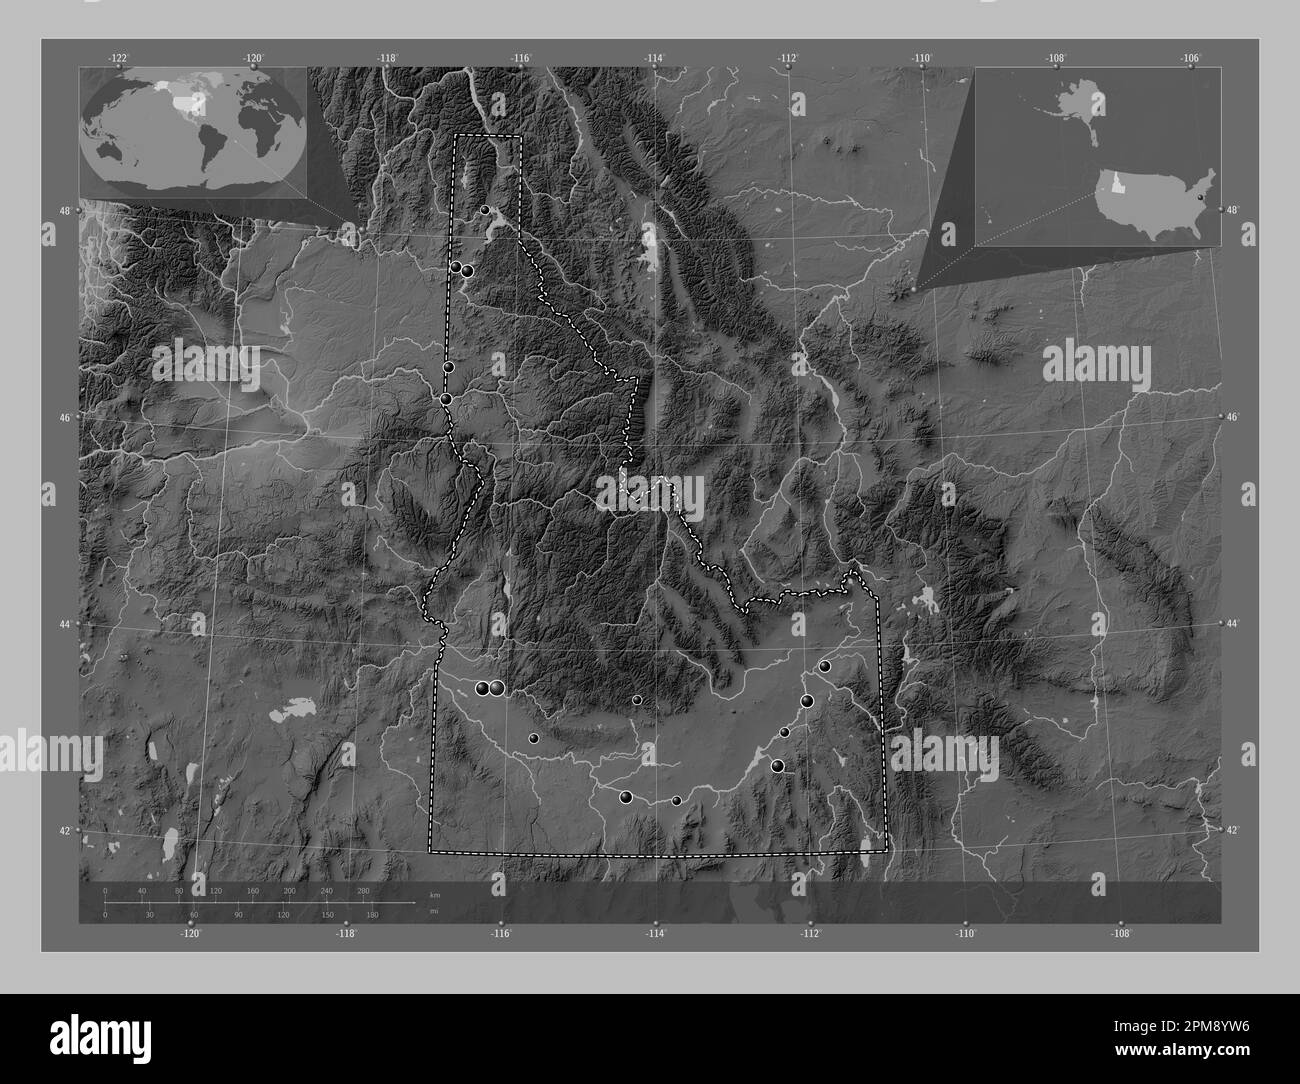 Idaho, state of United States of America. Grayscale elevation map with lakes and rivers. Locations of major cities of the region. Corner auxiliary loc Stock Photo